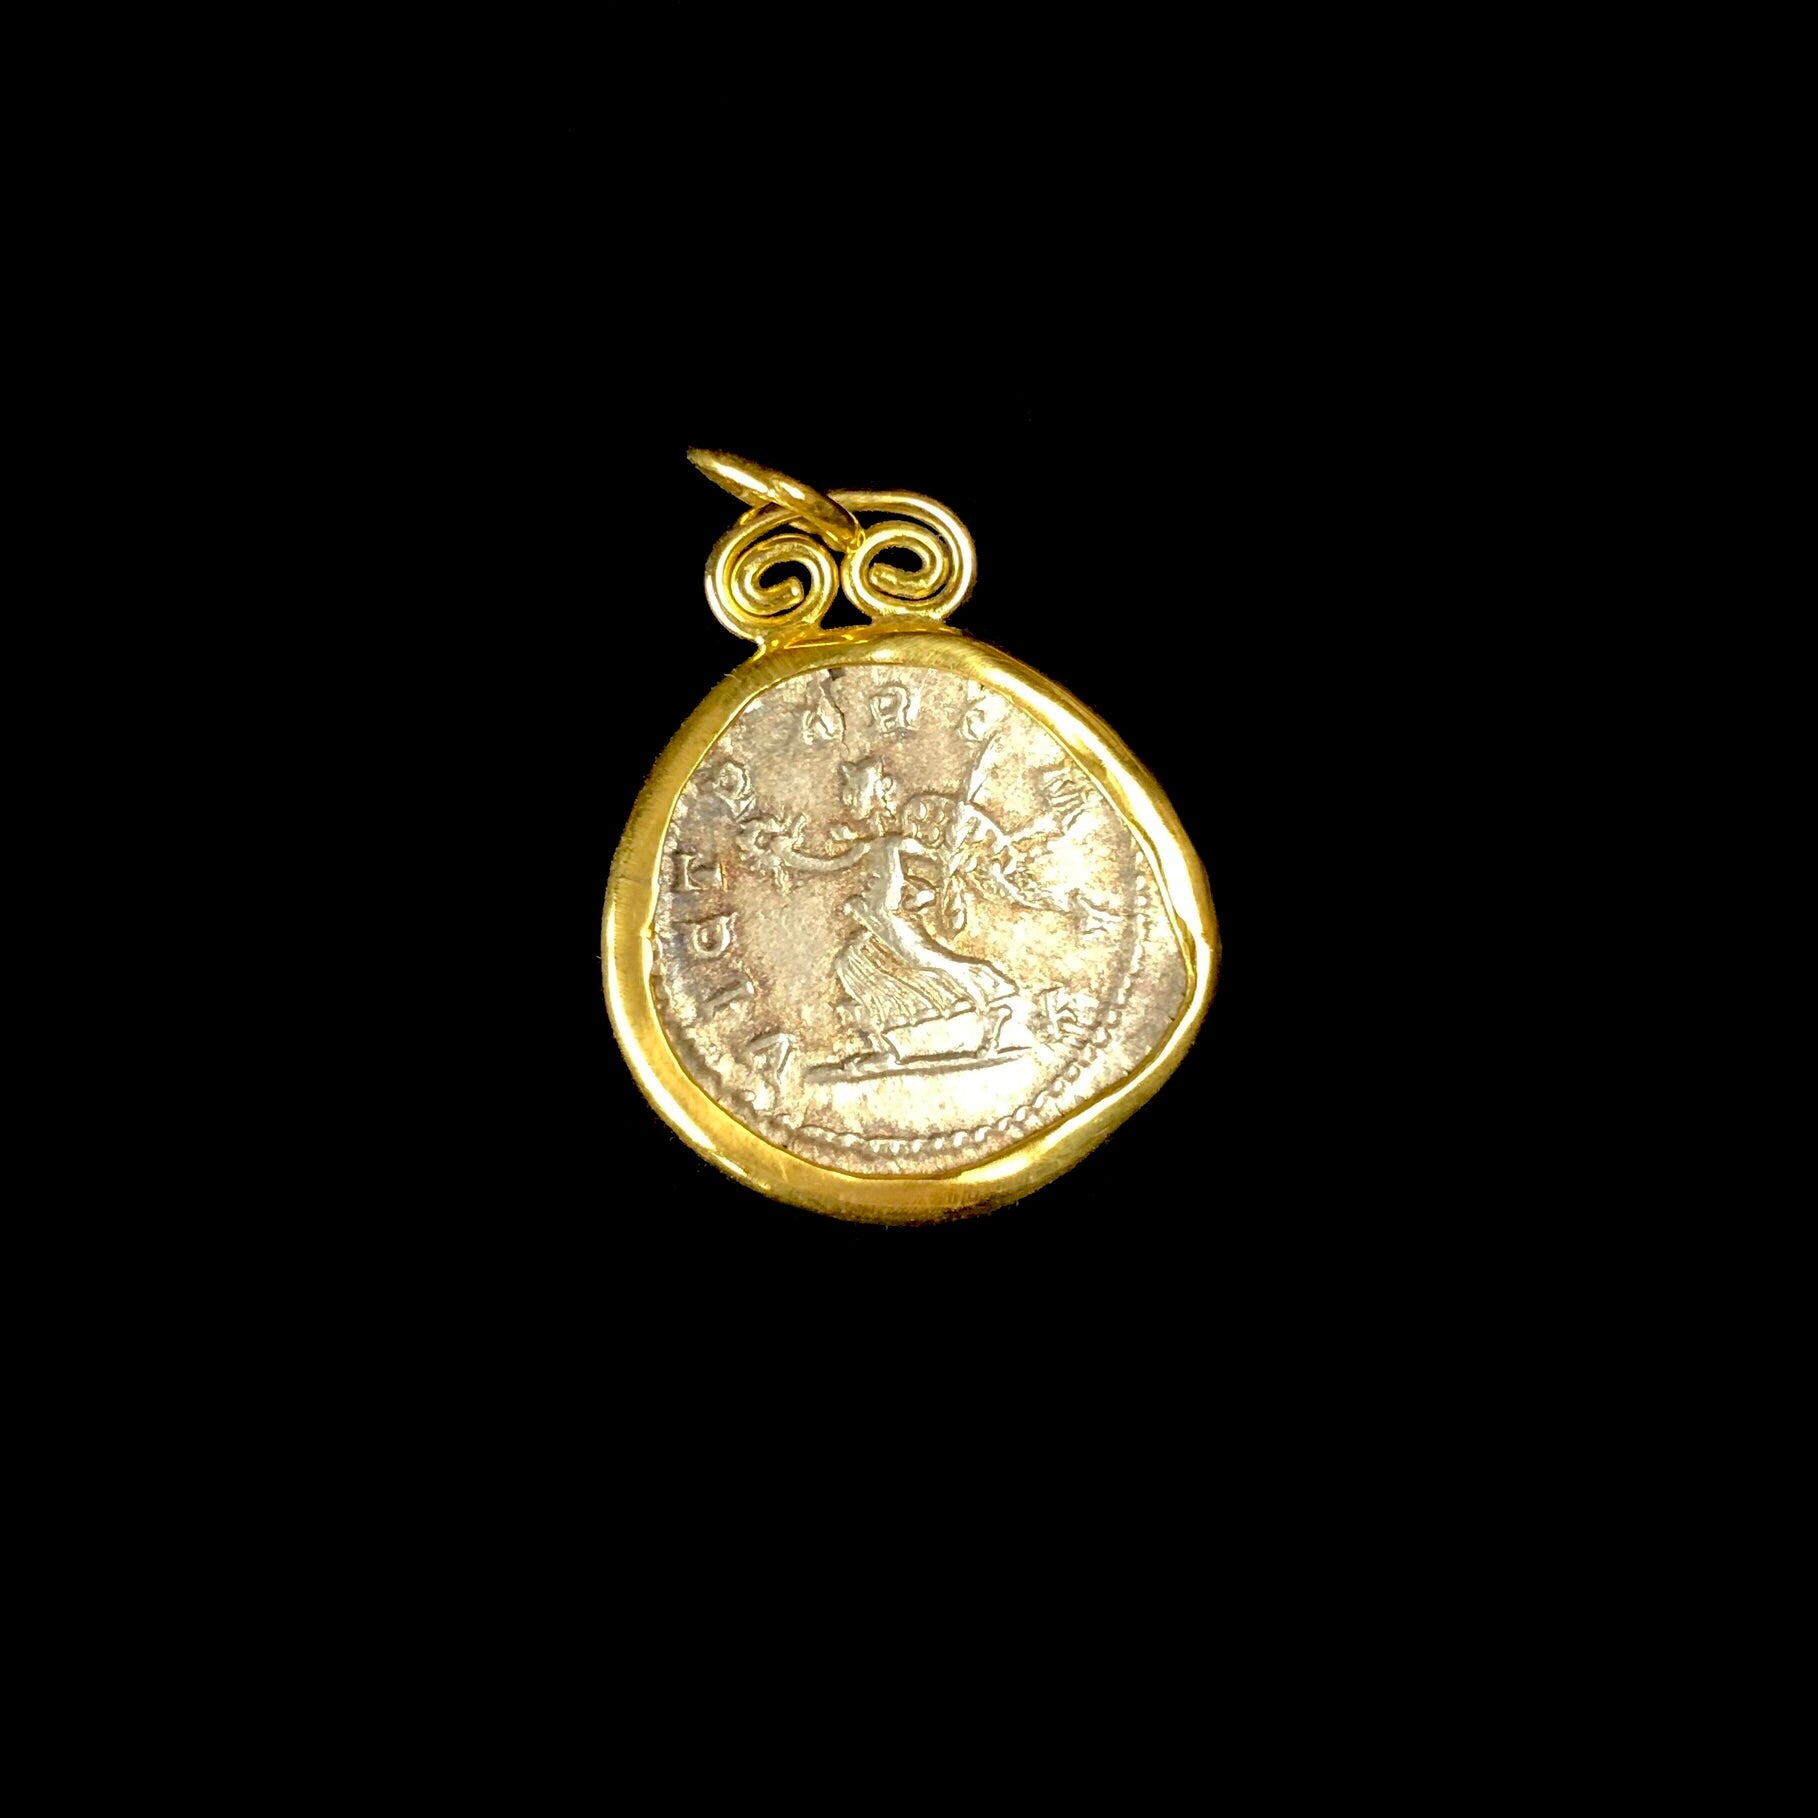 Obverse of Ancient Coin of Victory Pendent